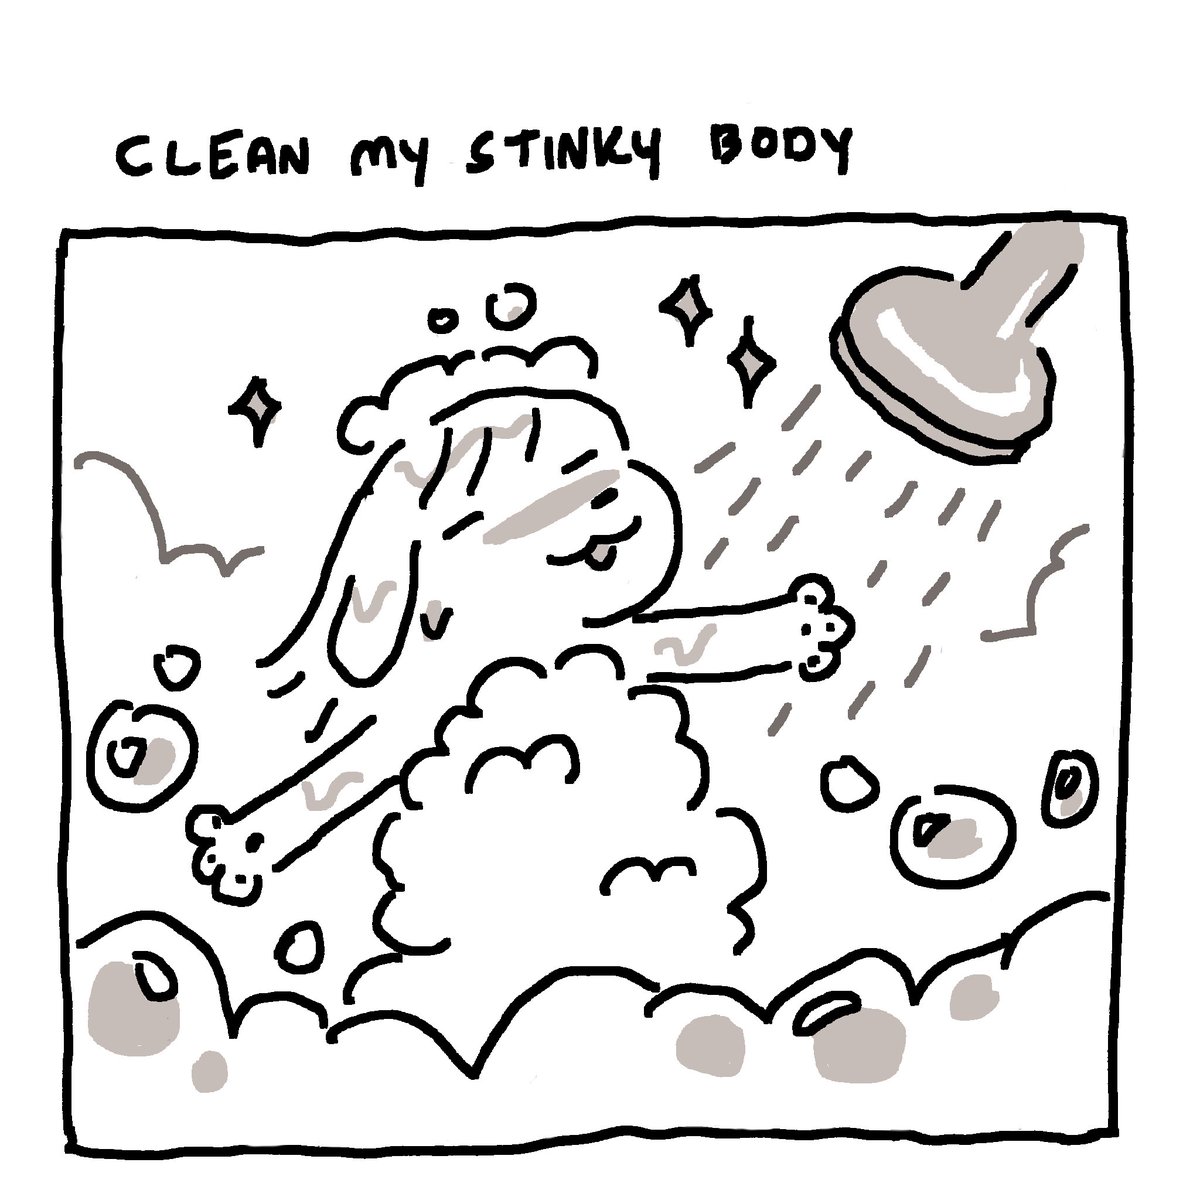 MORE hourlies! as you can see I am so athletic and cool for going to the gym 